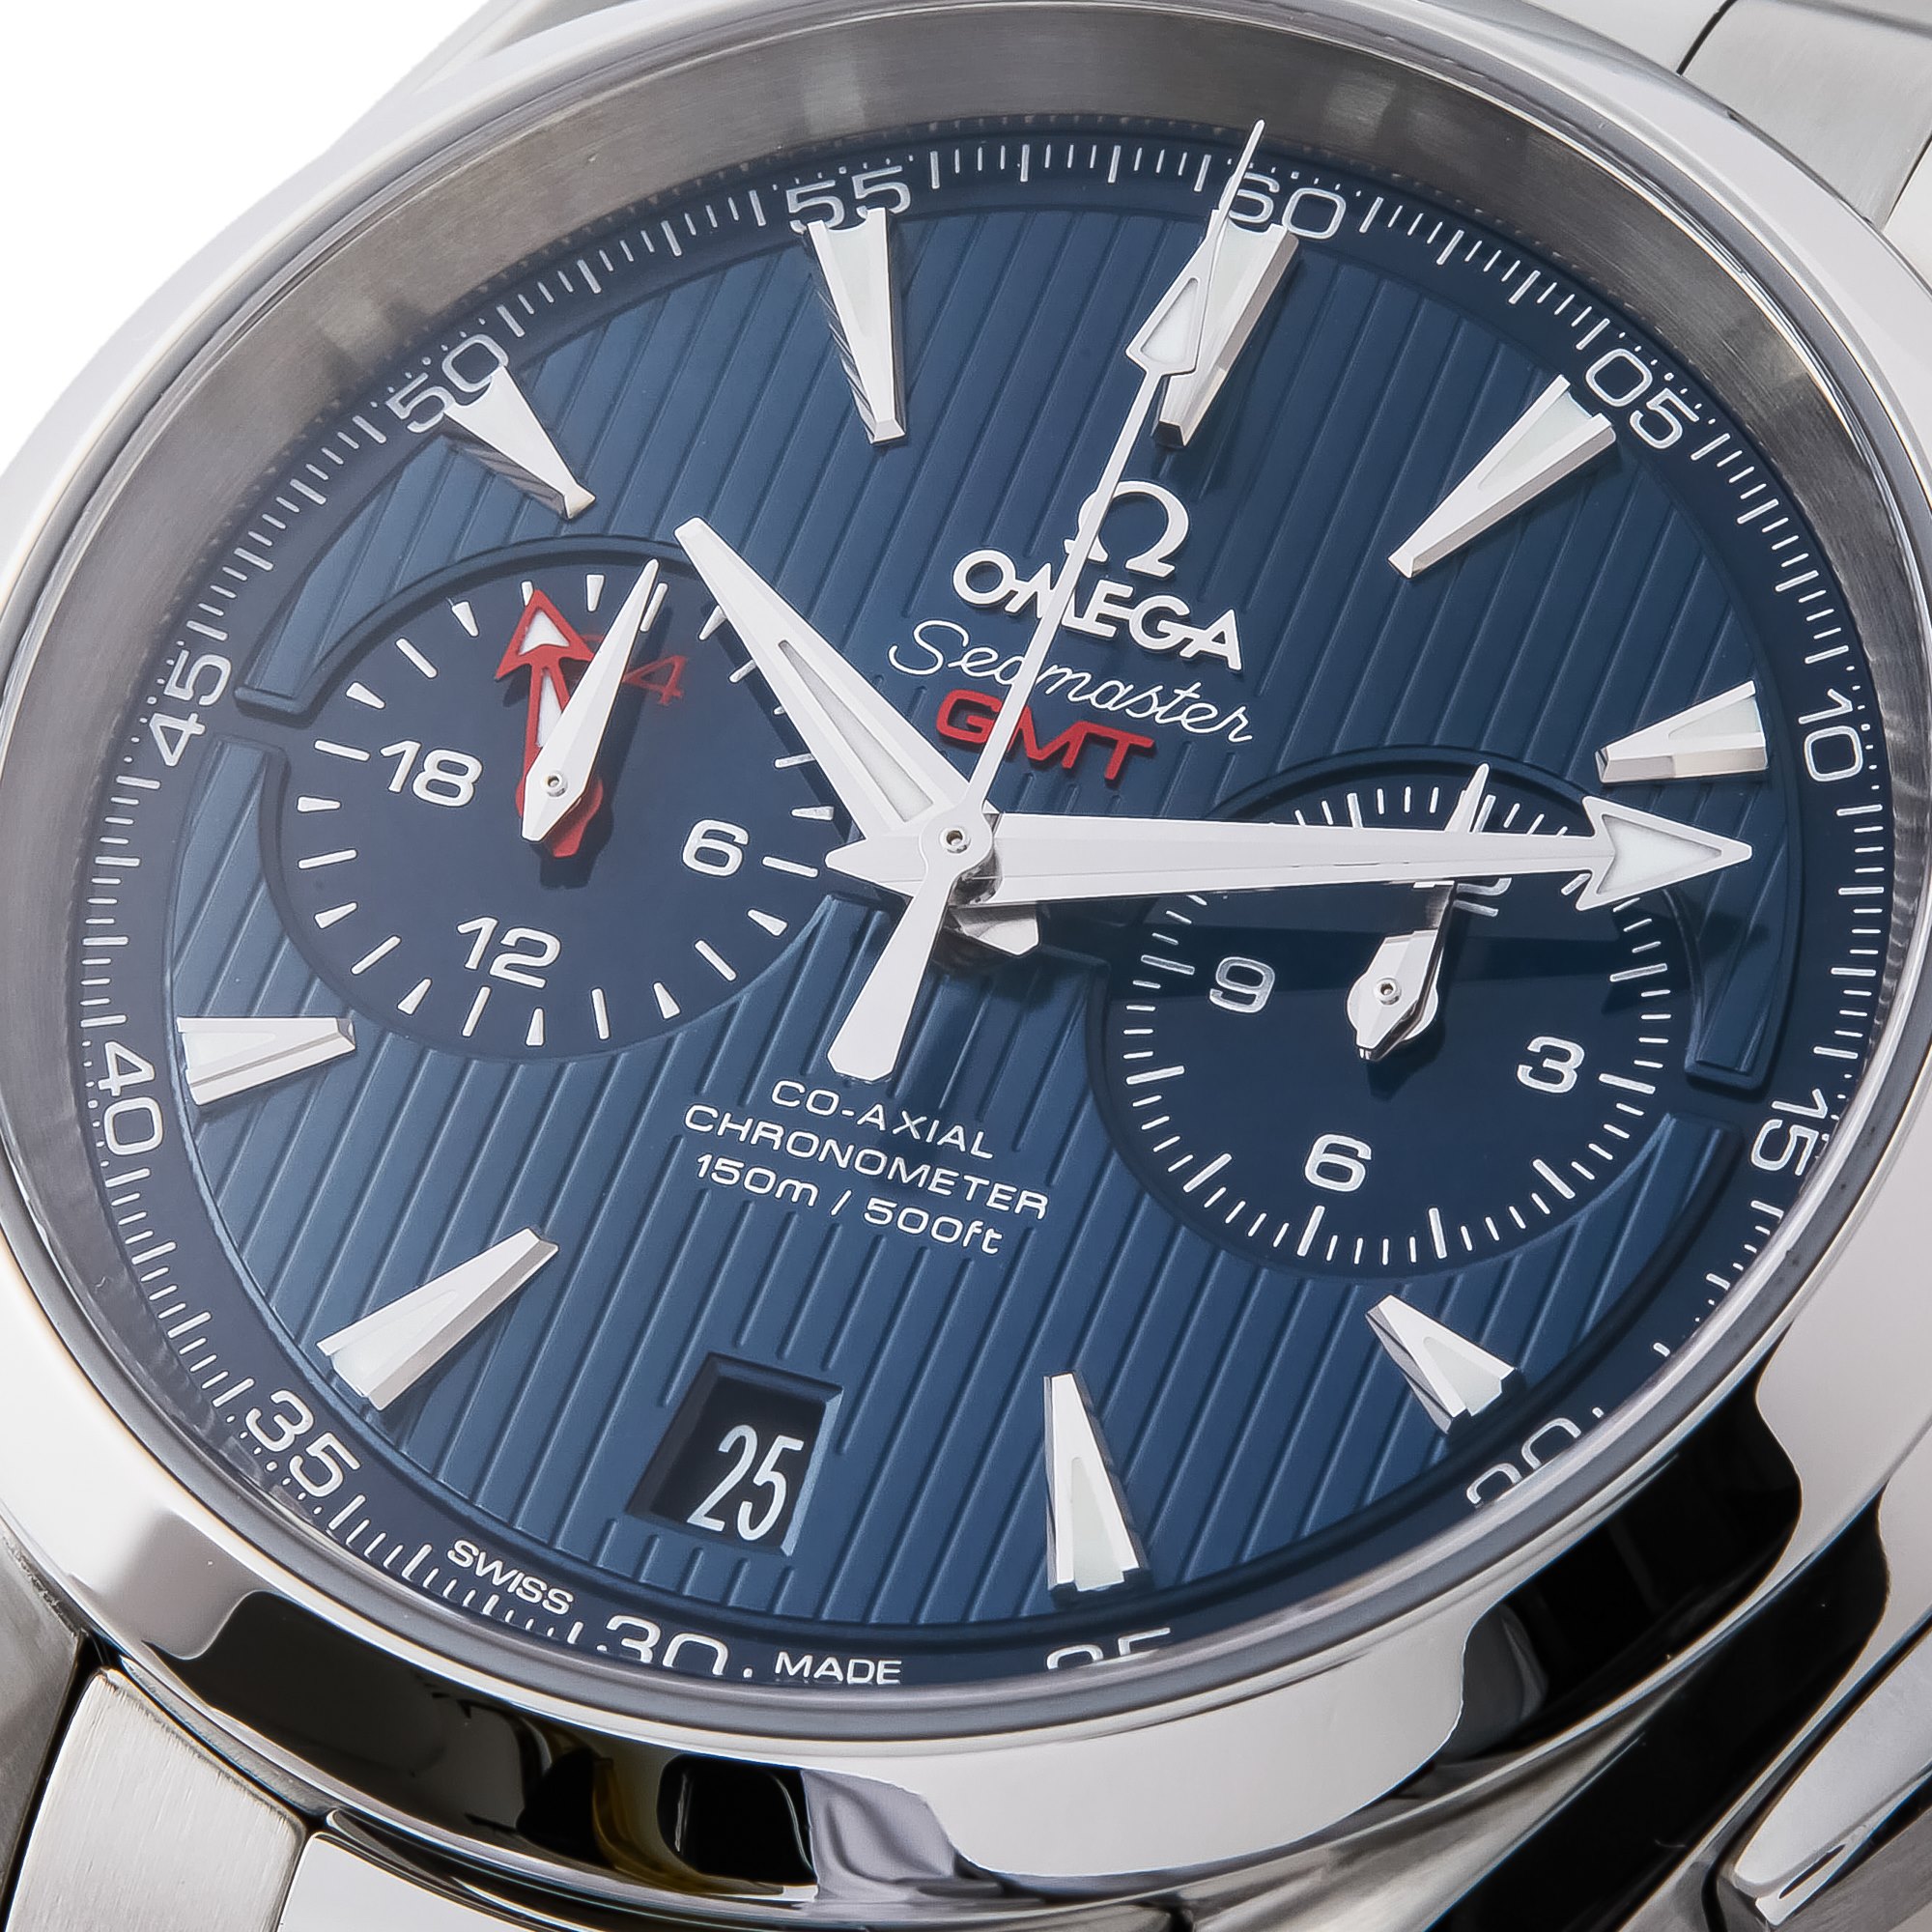 Omega Seamaster Chronograph GMT Stainless Steel 231.13.43.52.03.001